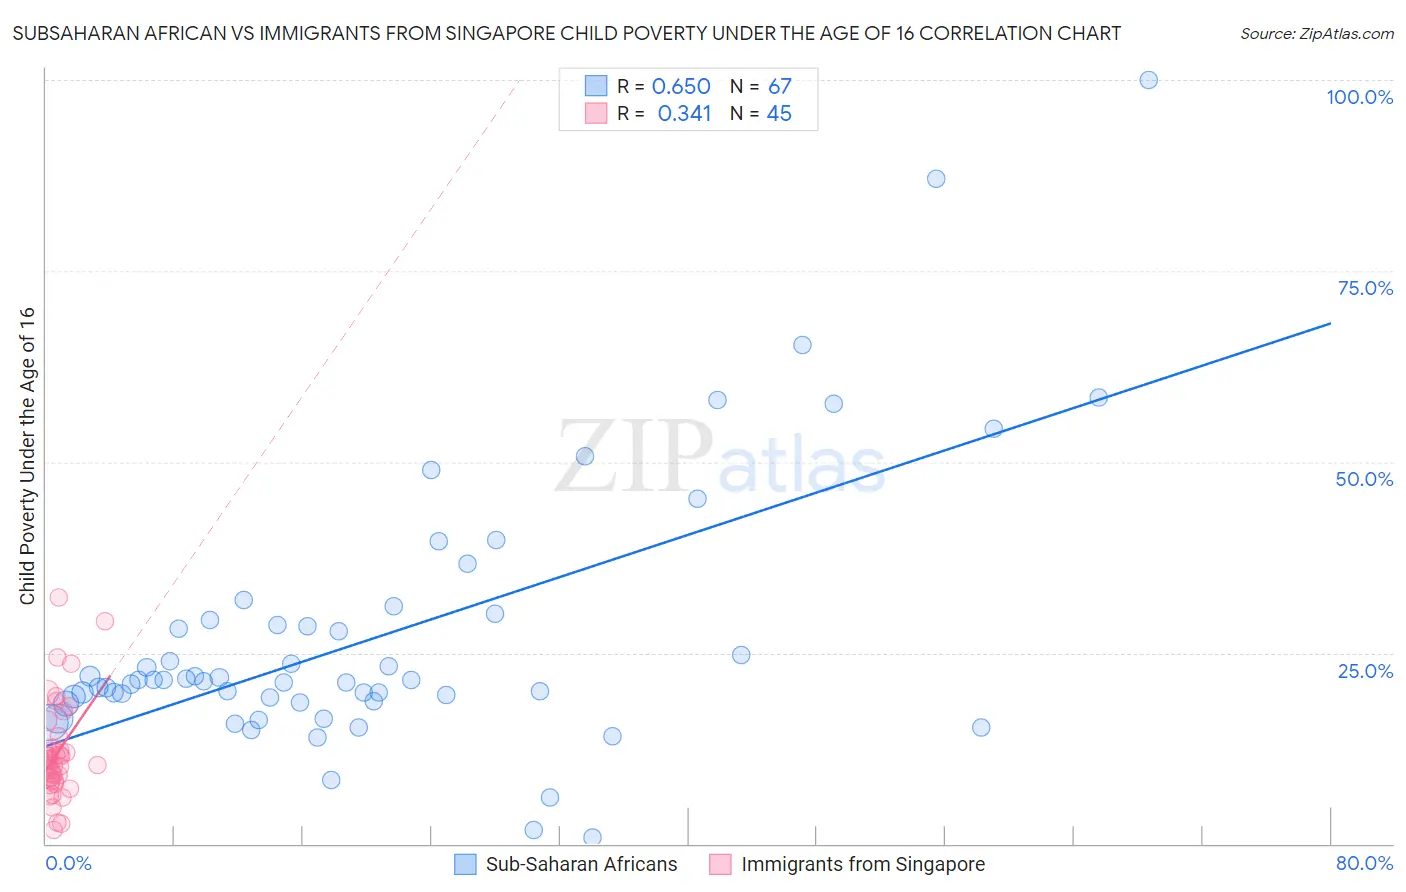 Subsaharan African vs Immigrants from Singapore Child Poverty Under the Age of 16